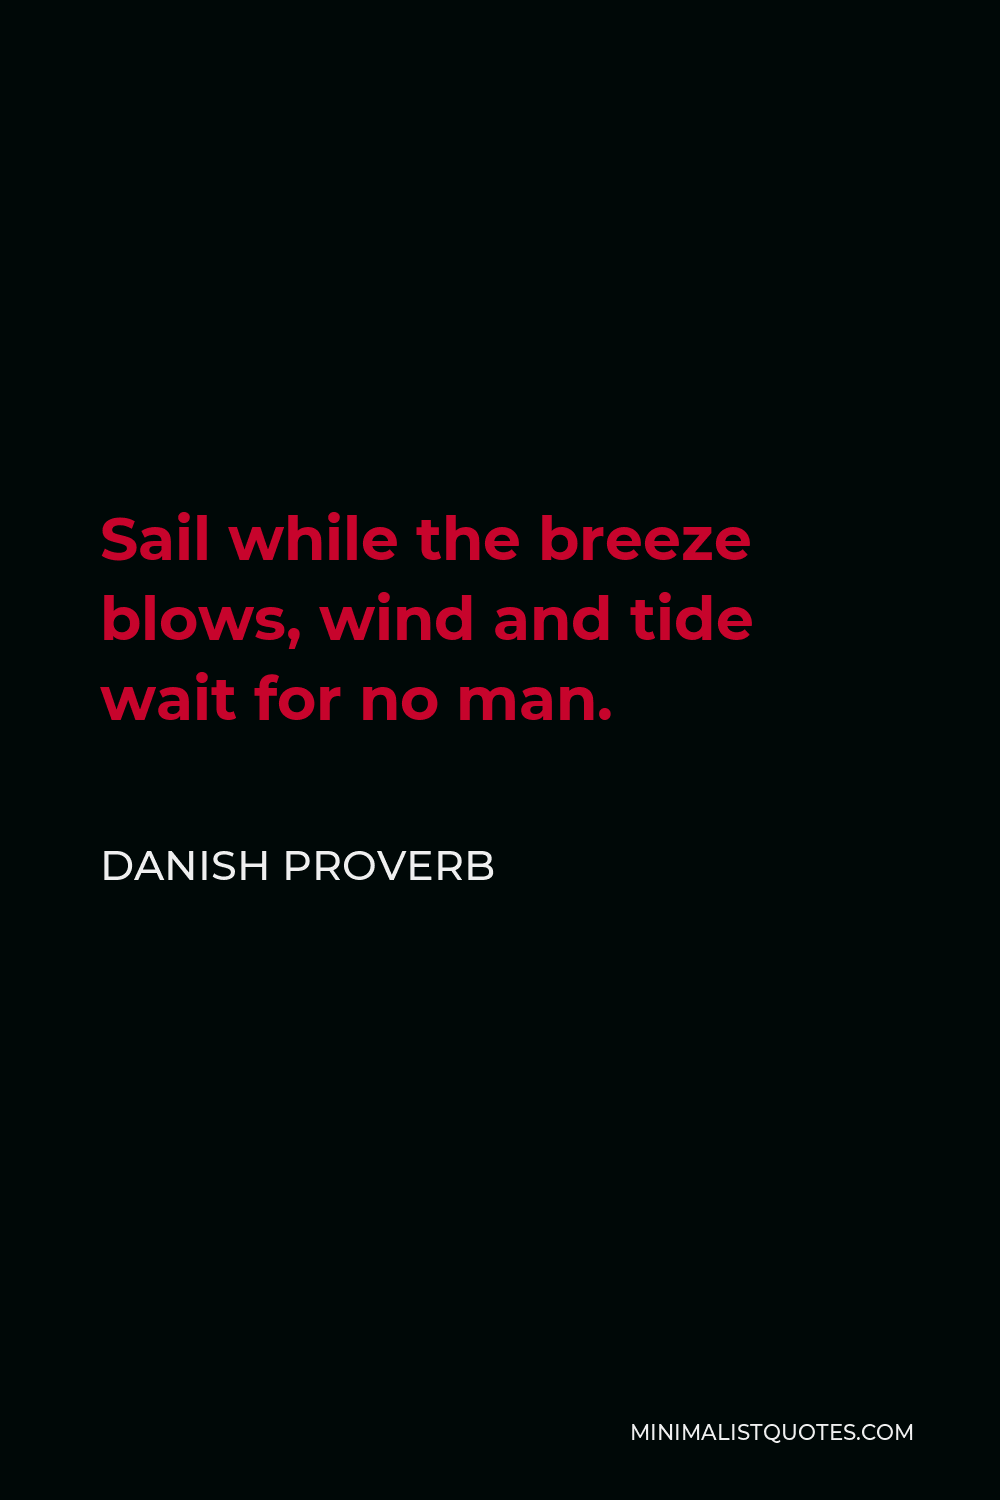 Danish Proverb Quote - Sail while the breeze blows, wind and tide wait for no man.